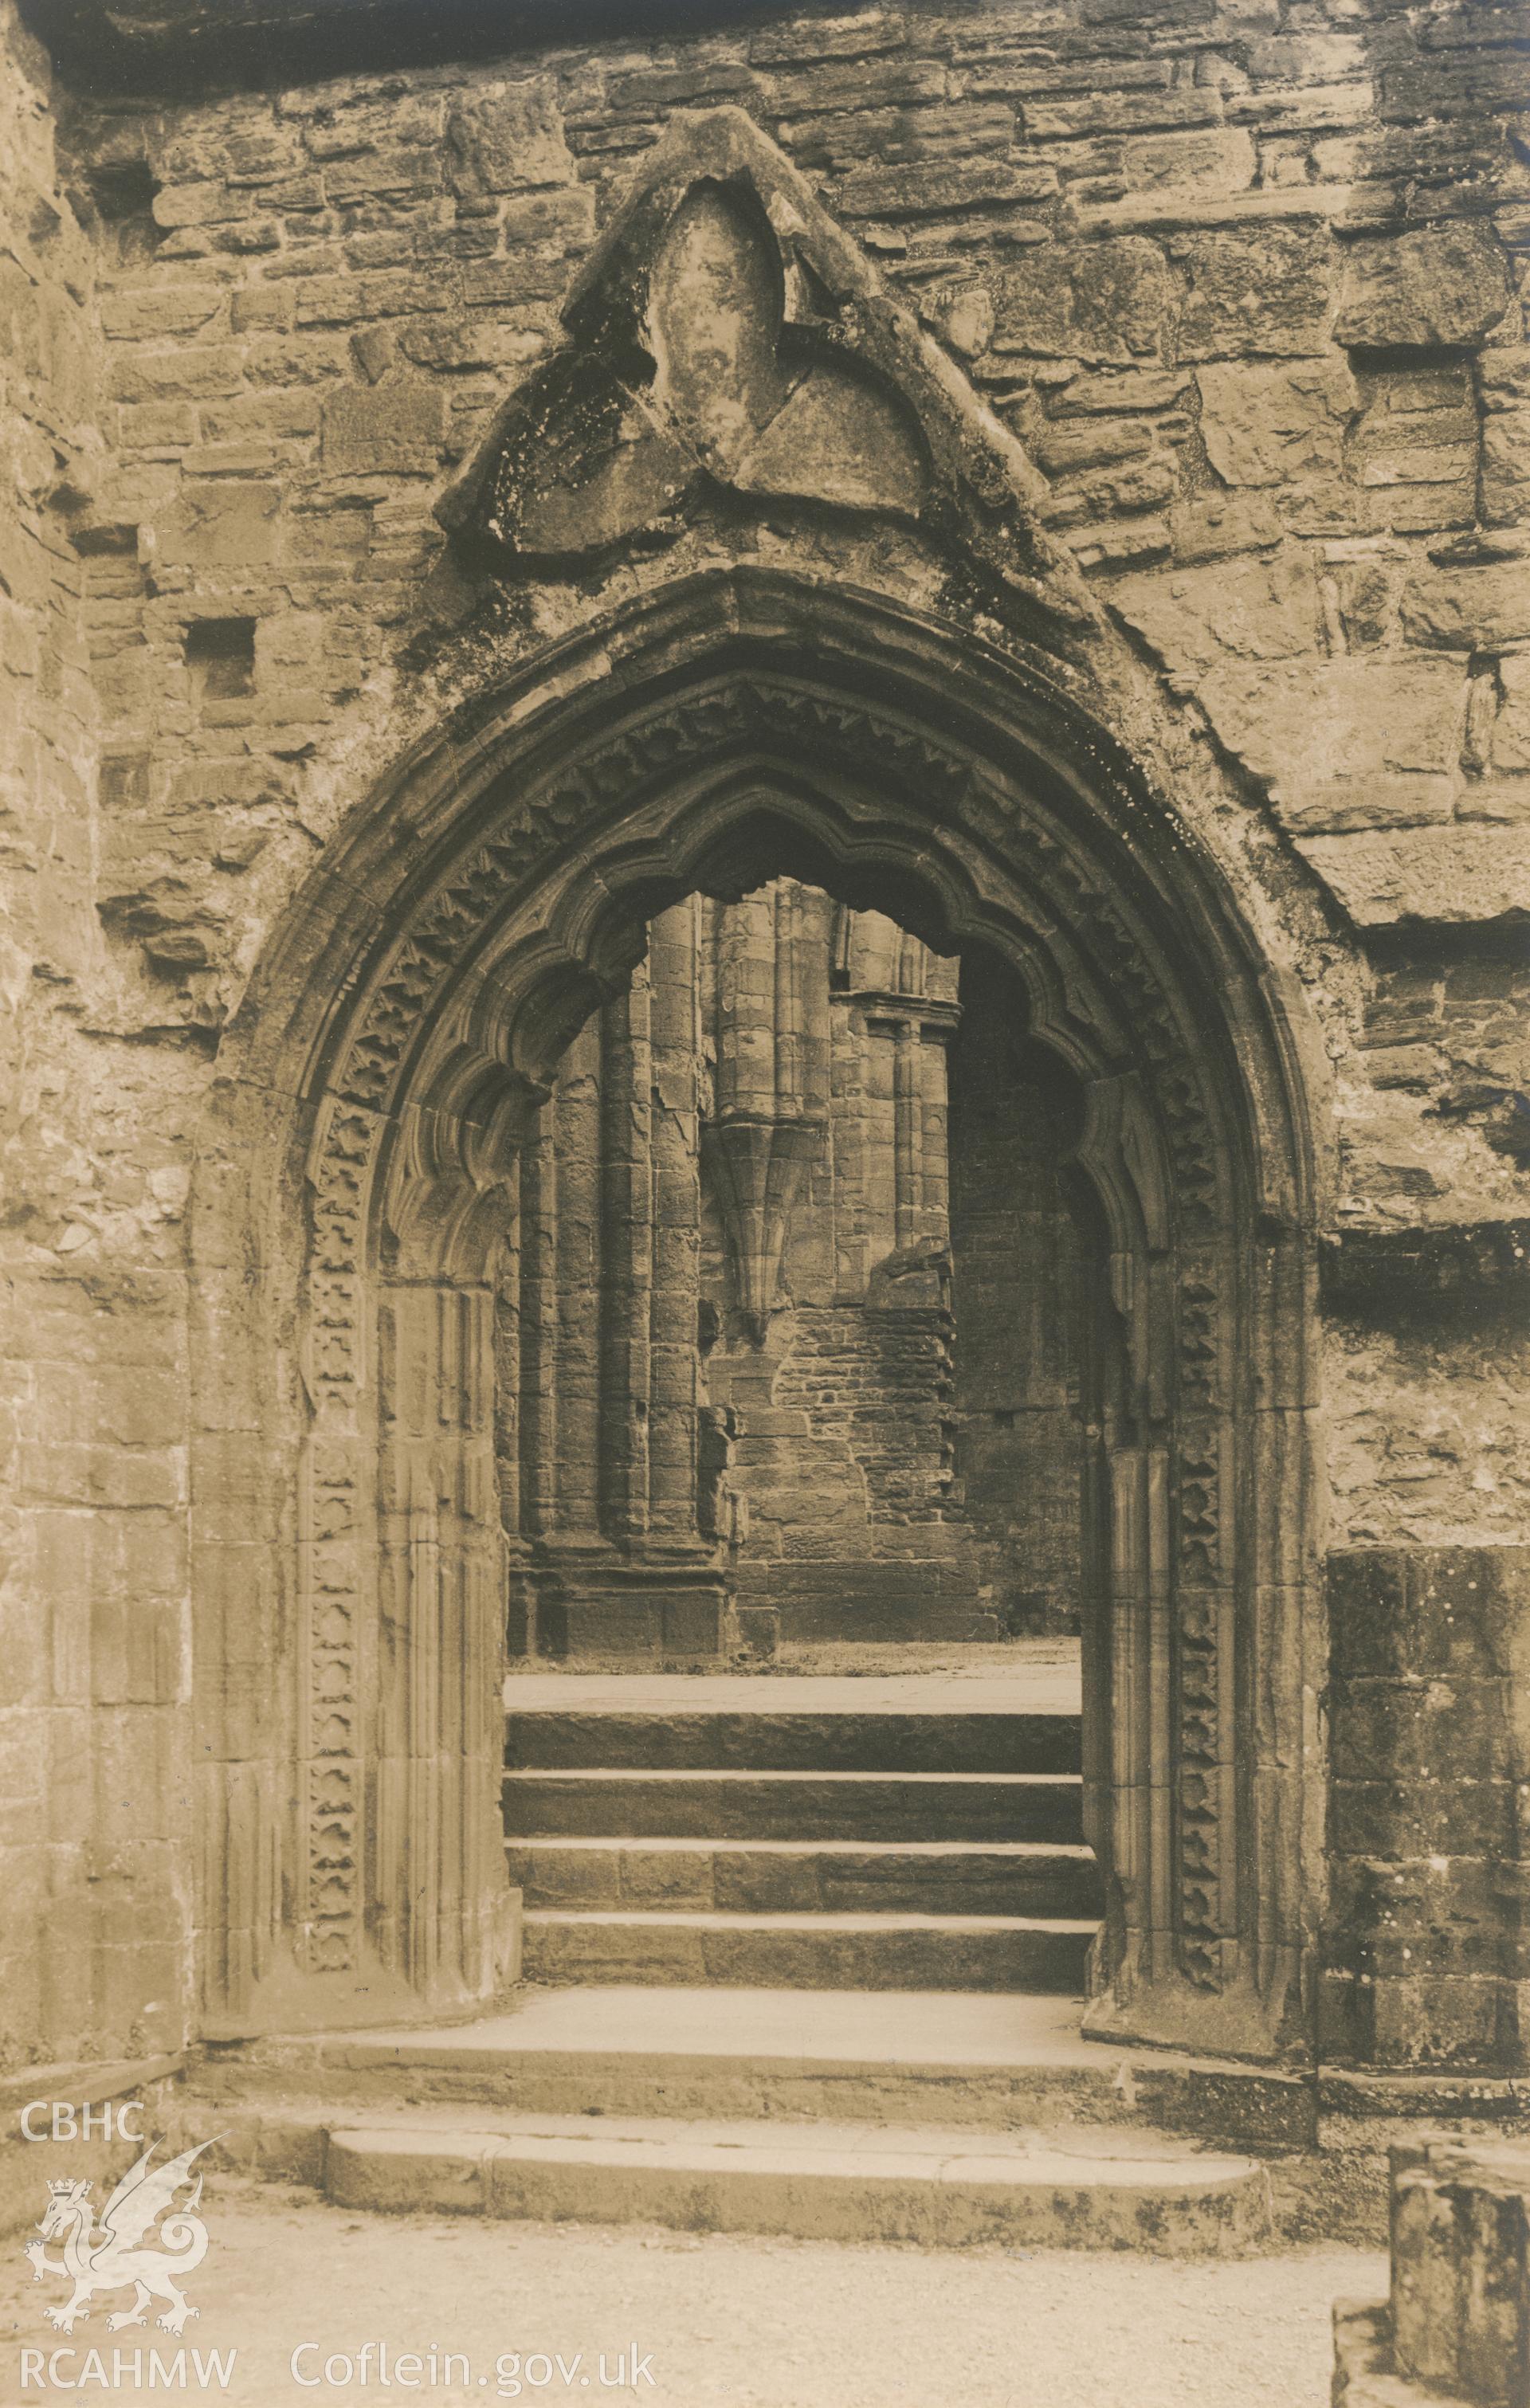 Digital copy of a view of the doorway from the cloisters to the church at Tintern Abbey.